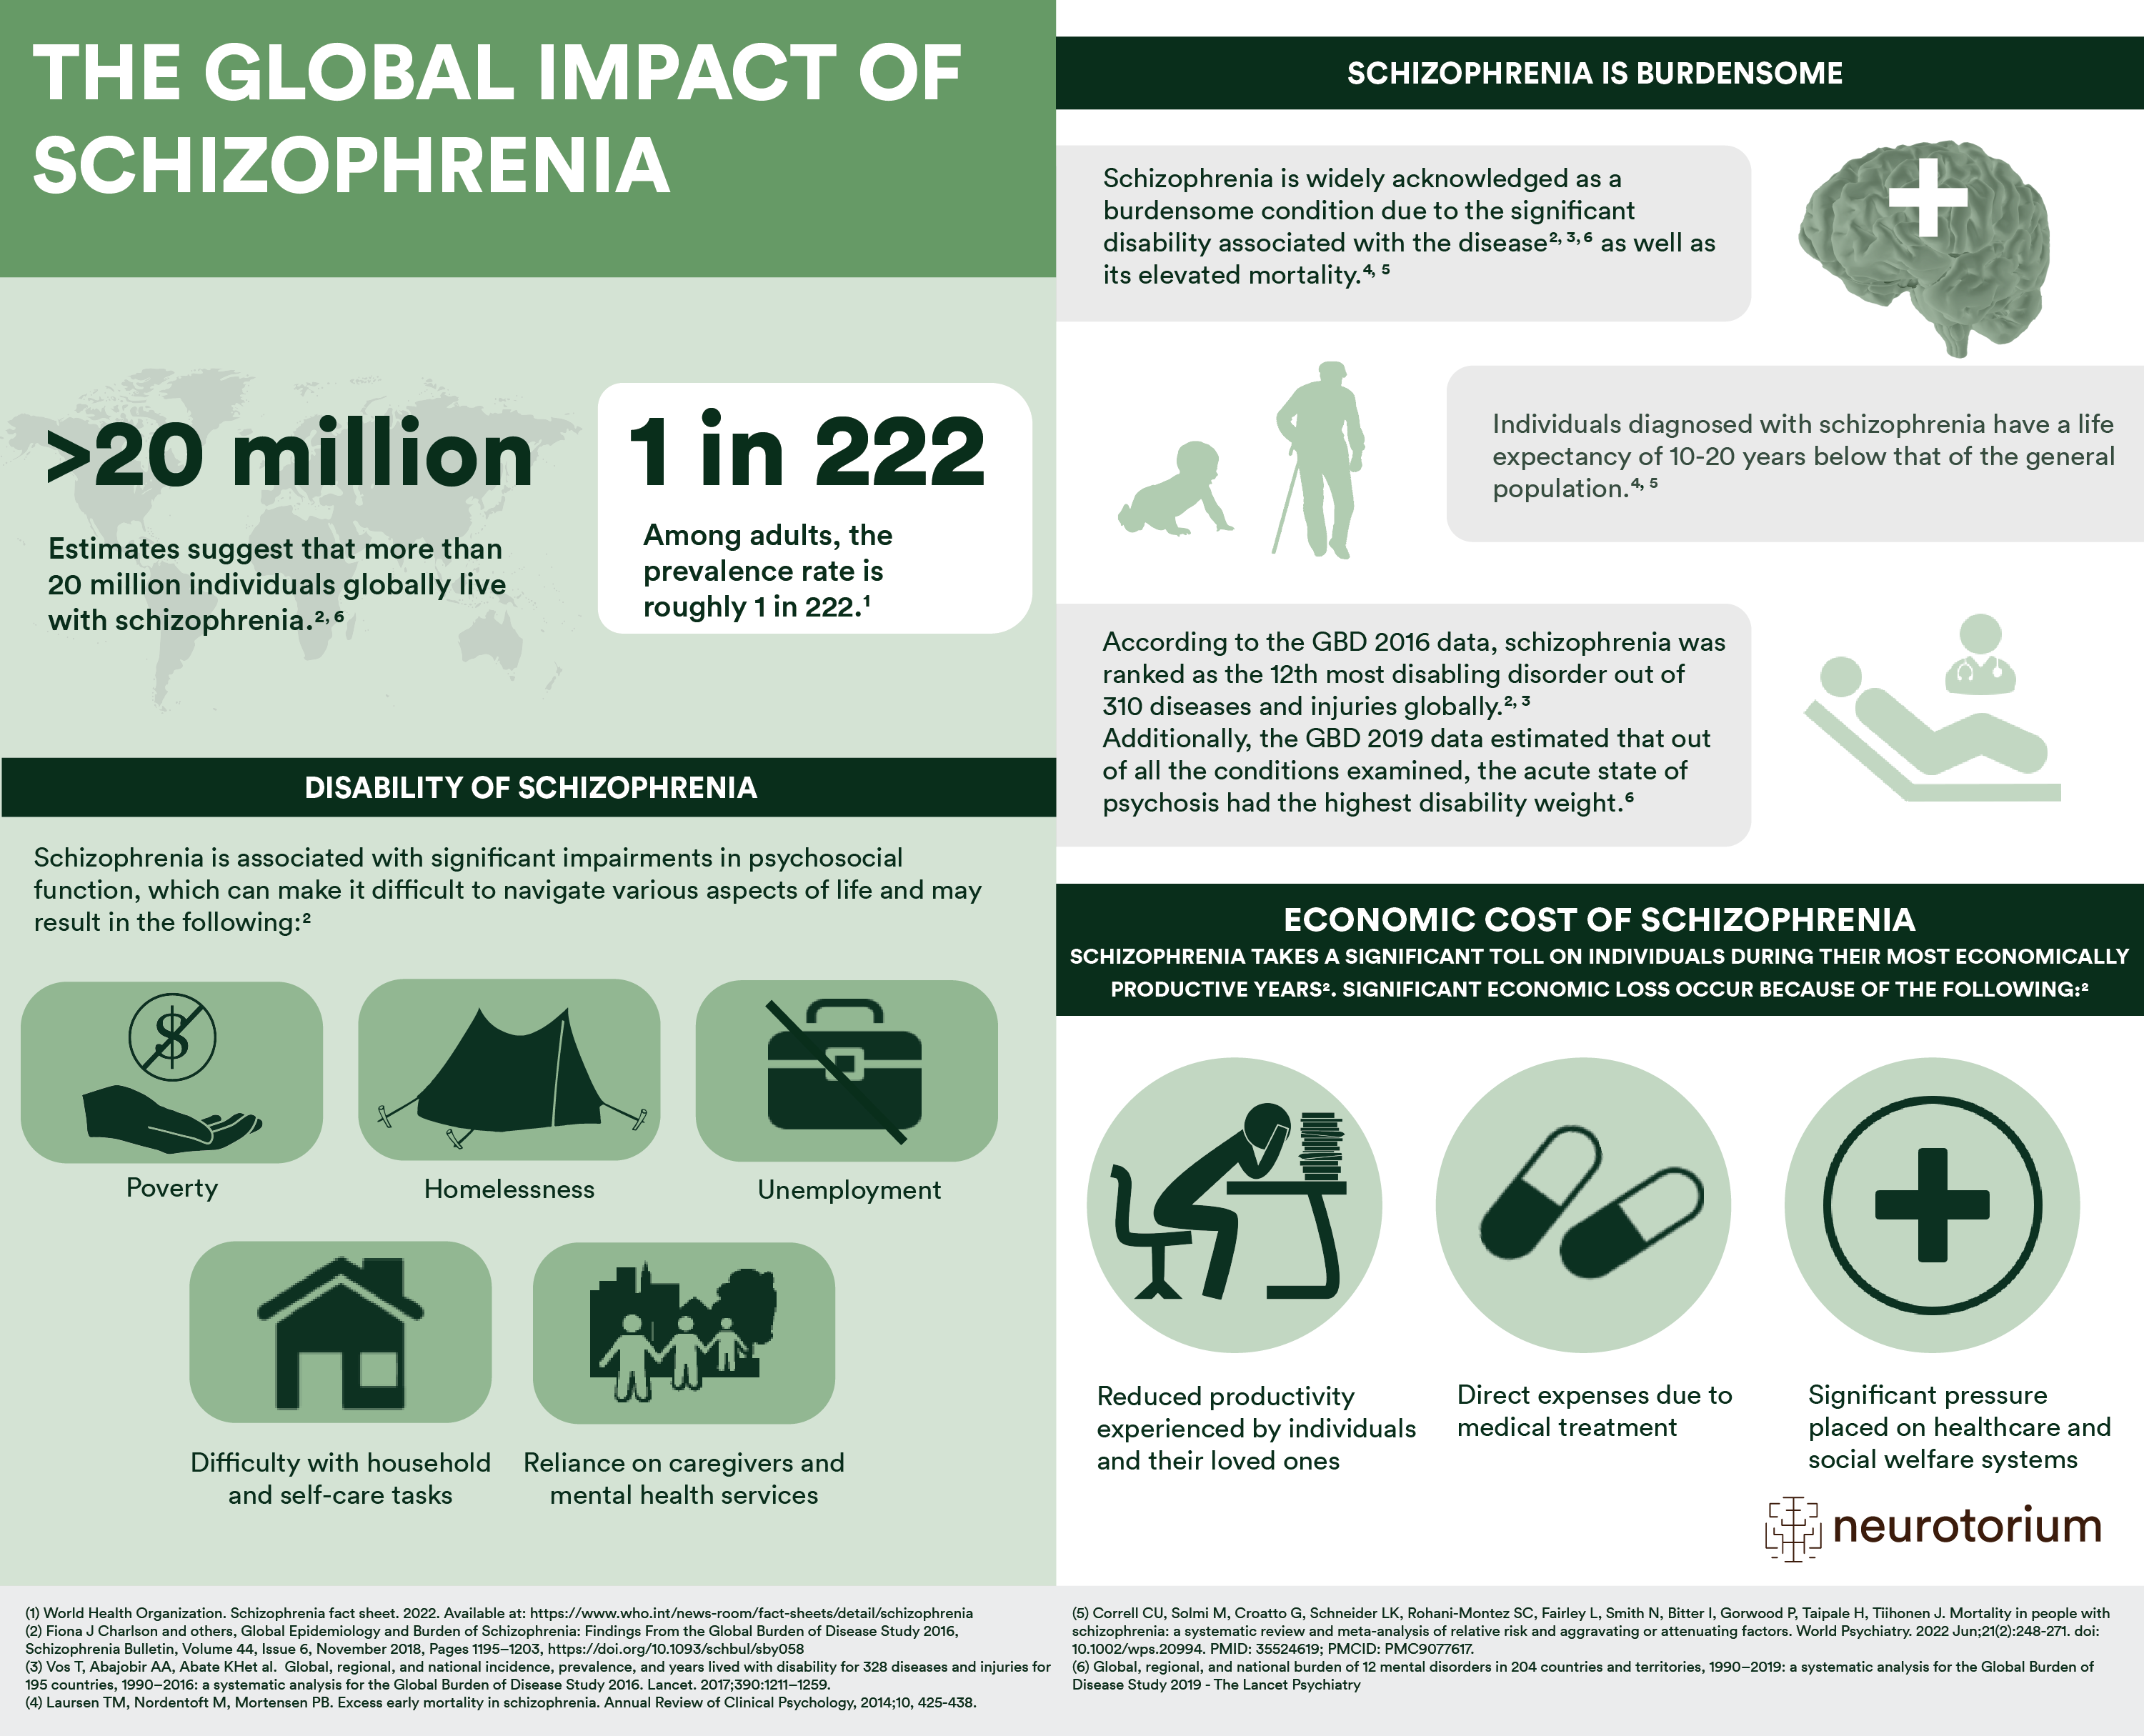 This infographic provides a visual, at-a-glance overview of the global impact of schizophrenia.